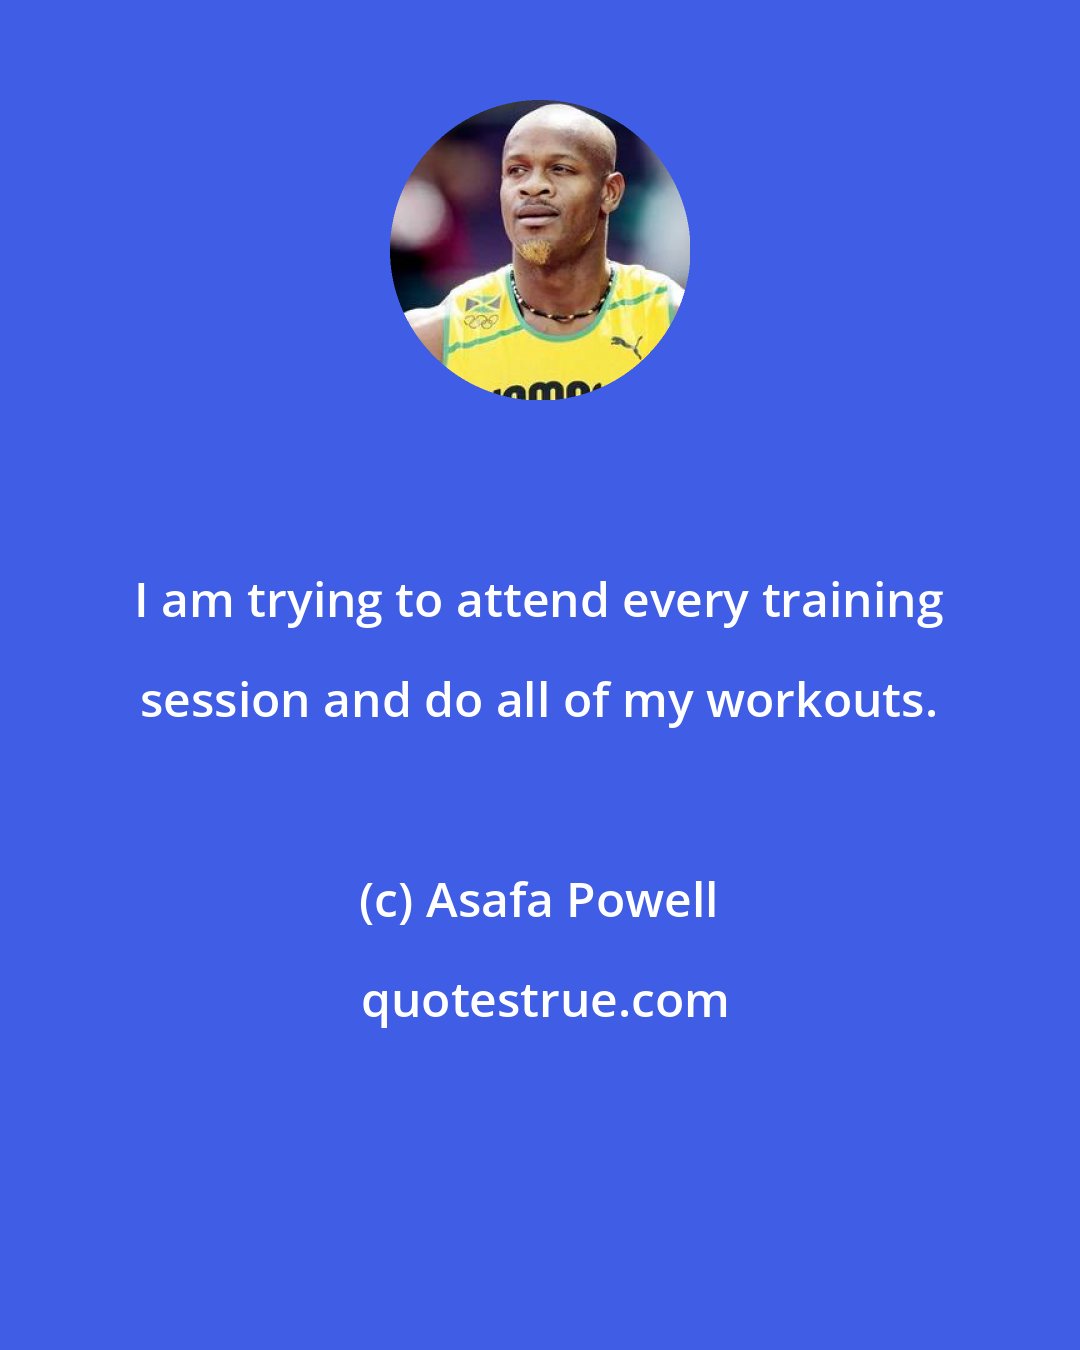 Asafa Powell: I am trying to attend every training session and do all of my workouts.